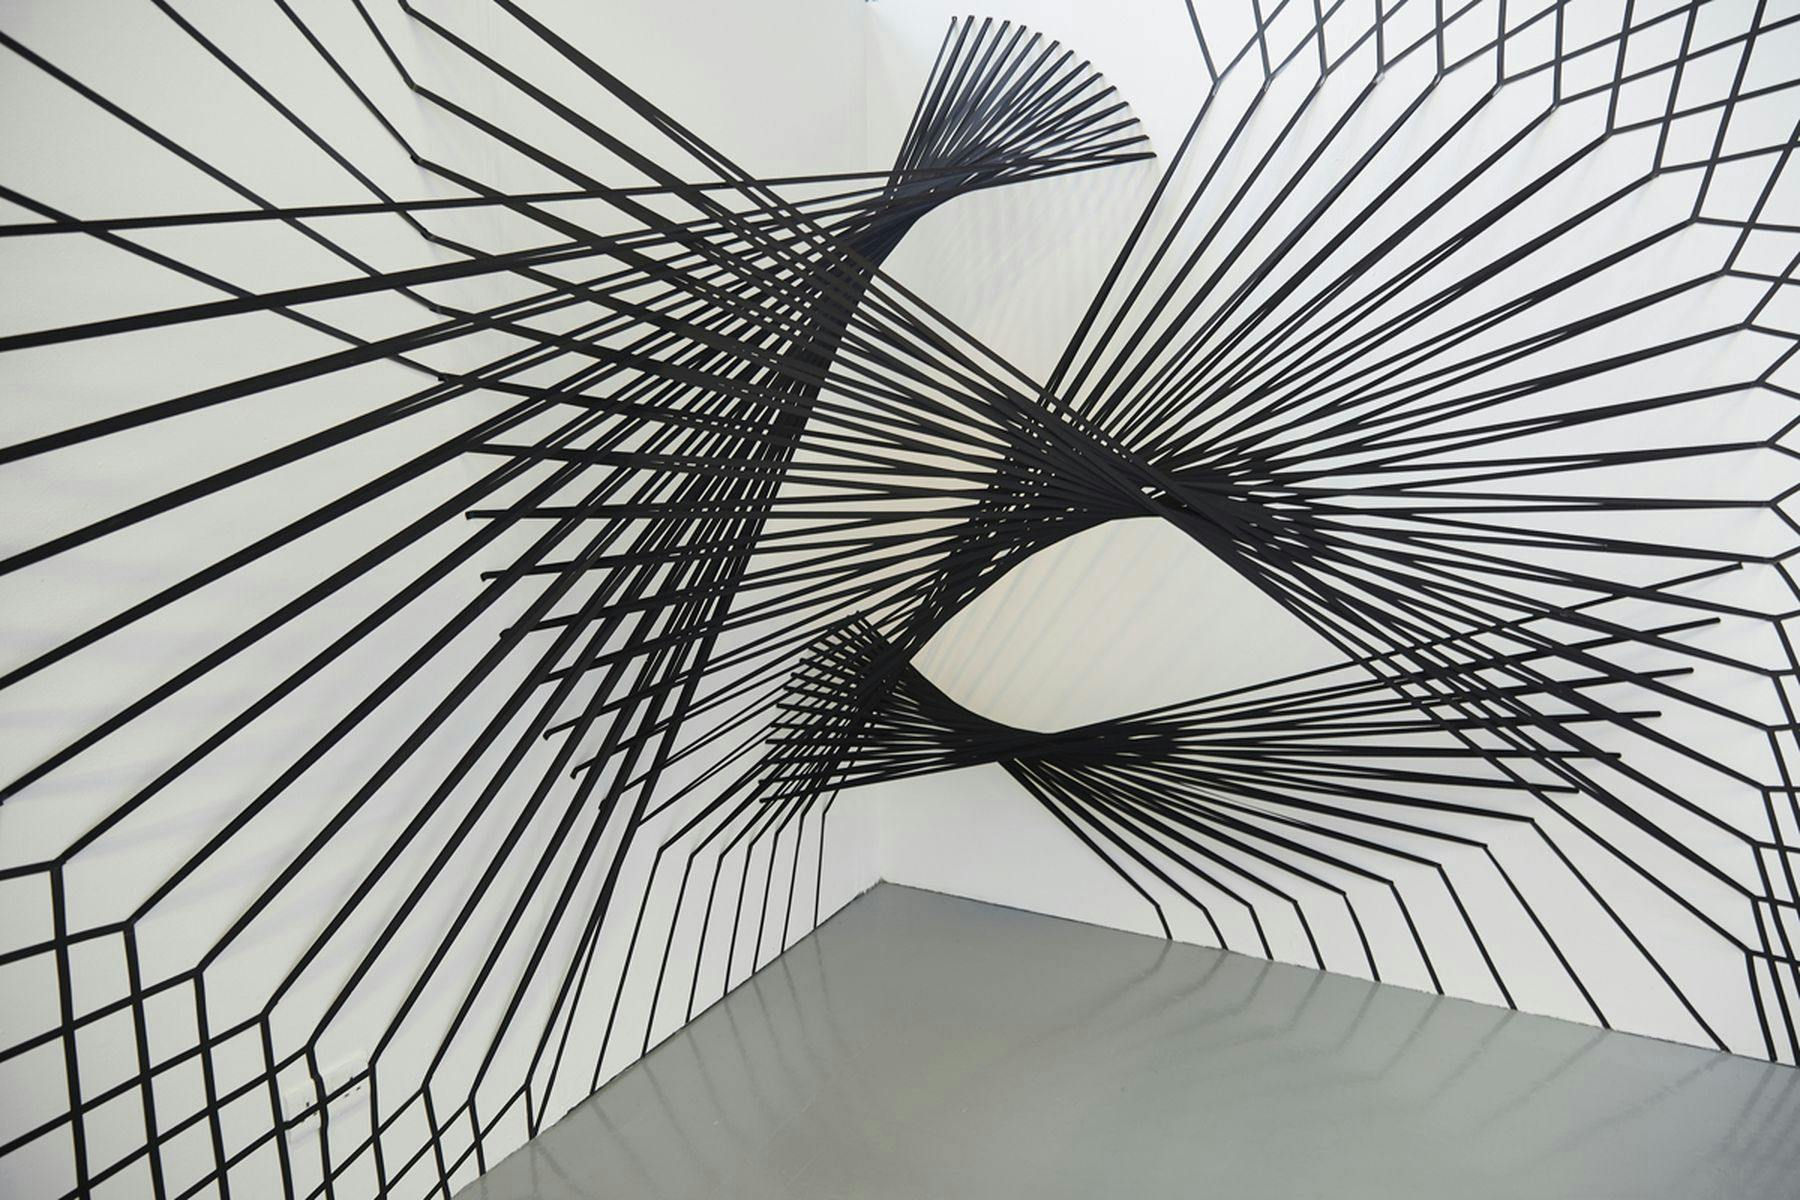 A photograph of black spiral structures mounted against a white wall. There are three interlinking structures in total consisting of vertical lines.